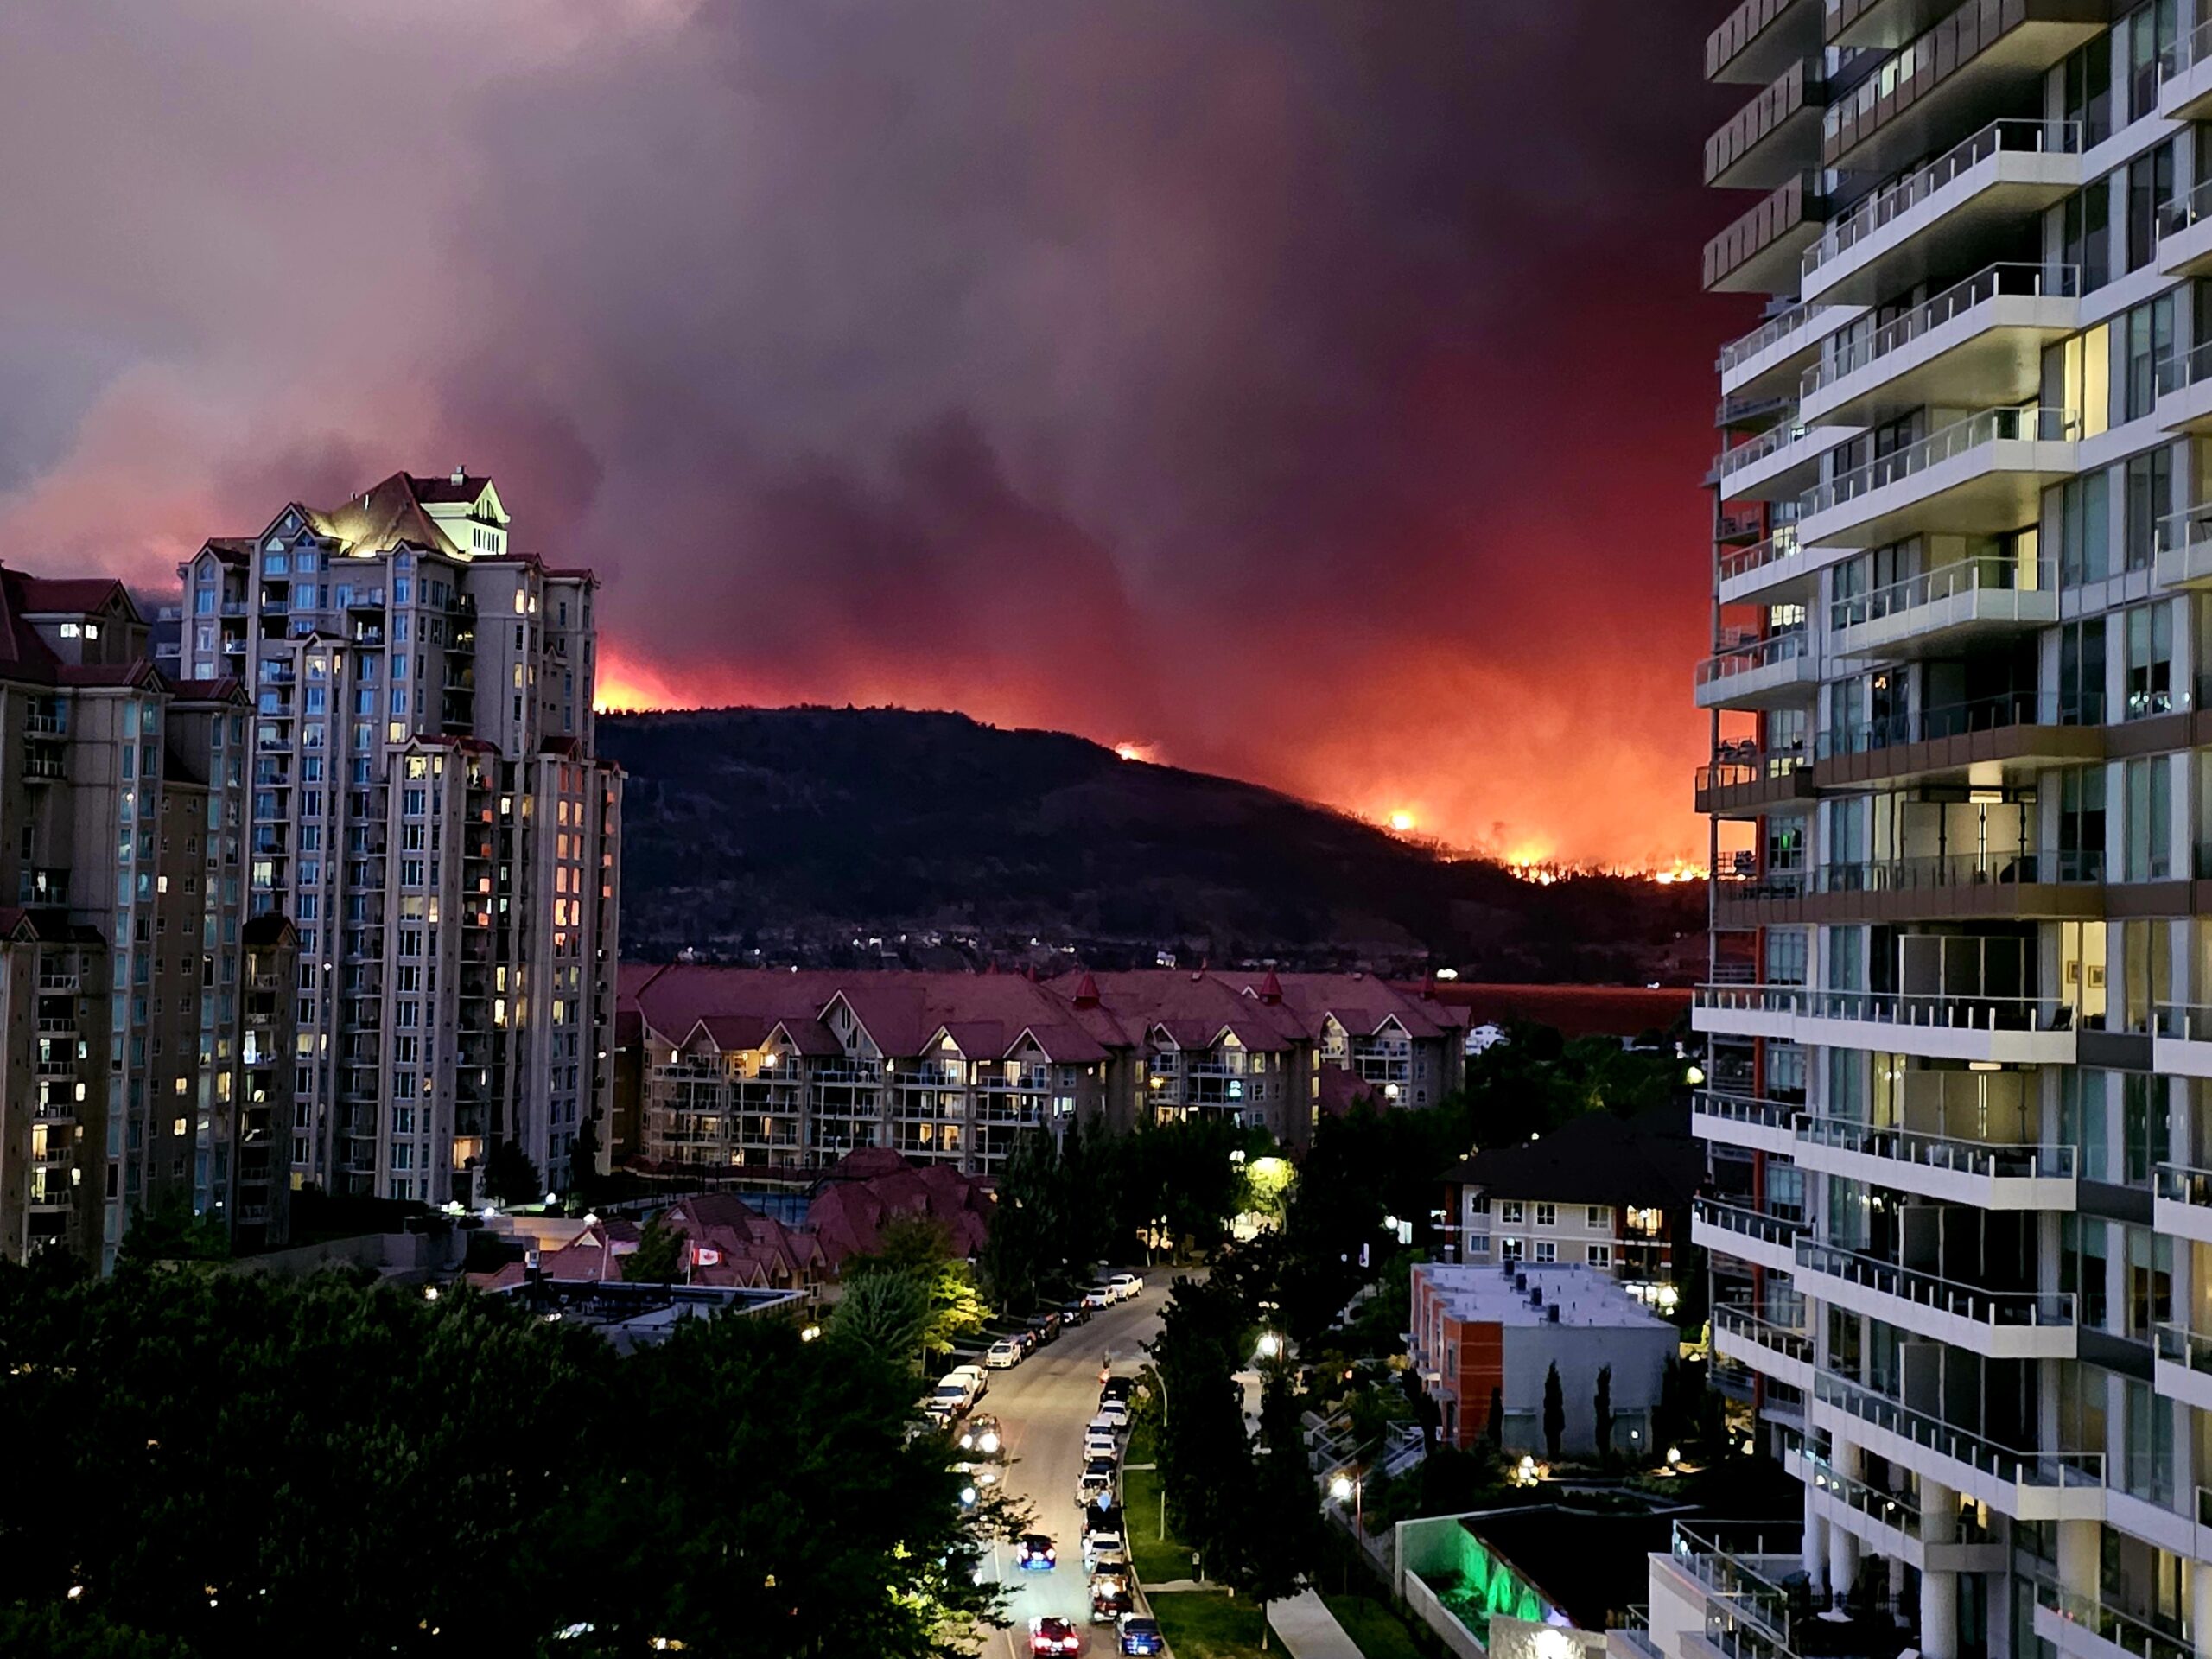 Wildfire consuming a hillside just outside Kelowna, BC with urban buildings in foreground.